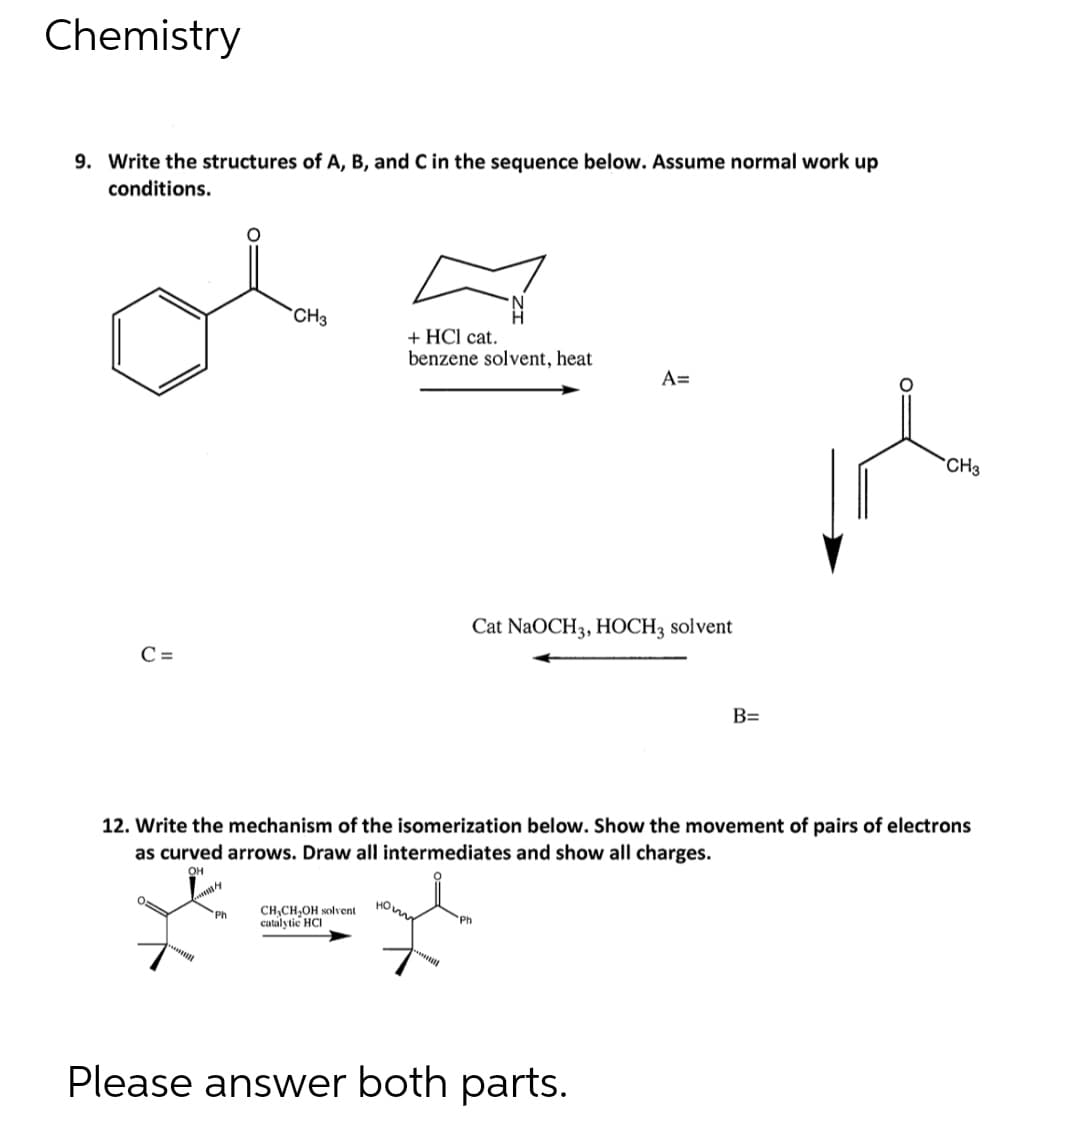 Chemistry
9. Write the structures of A, B, and C in the sequence below. Assume normal work up
conditions.
CH3
+ HCl cat.
benzene solvent, heat
A=
*CH3
Cat NaOCH3, HOCH3 solvent
C =
B=
12. Write the mechanism of the isomerization below. Show the movement of pairs of electrons
as curved arrows. Draw all intermediates and show all charges.
OH
CH,CH,OH solvent
catalytic HCI
Ph
Ph
Please answer both parts.
